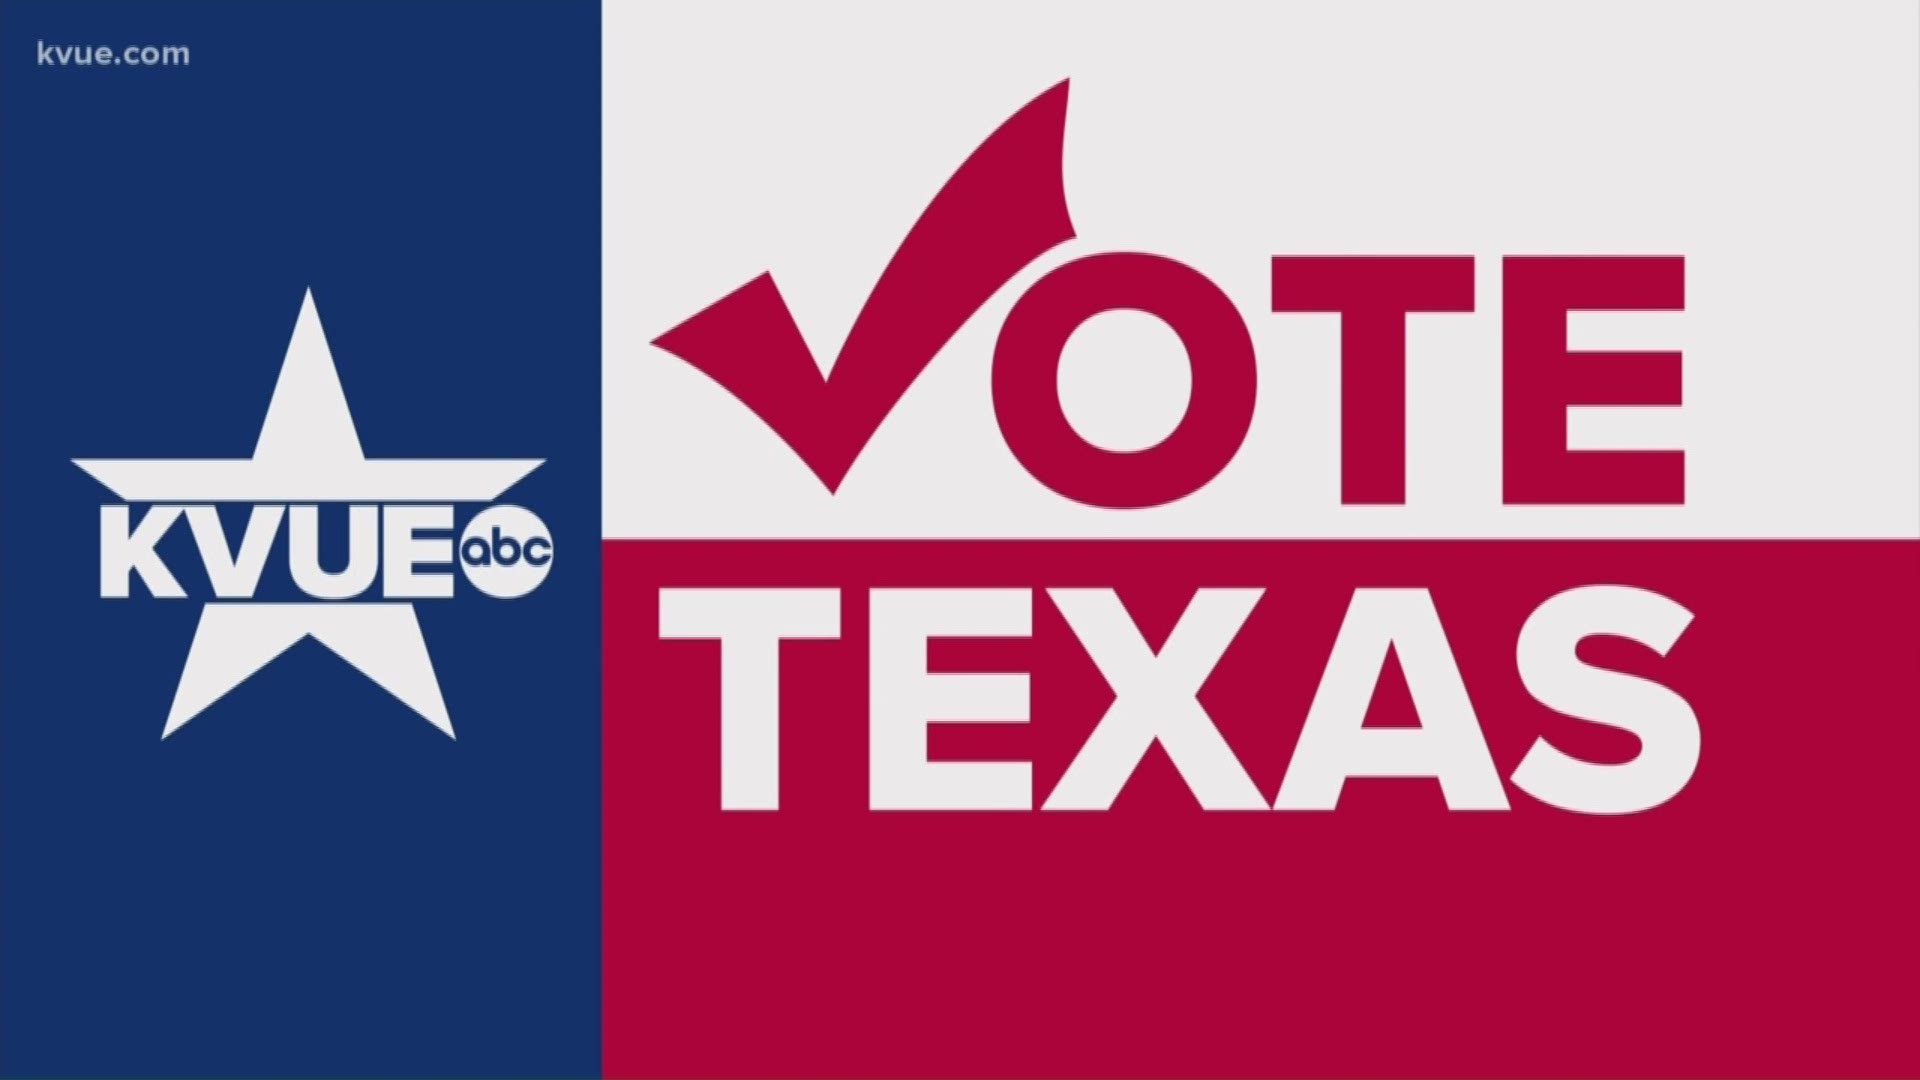 Voters are breaking records across Texas and the Austin area this election.